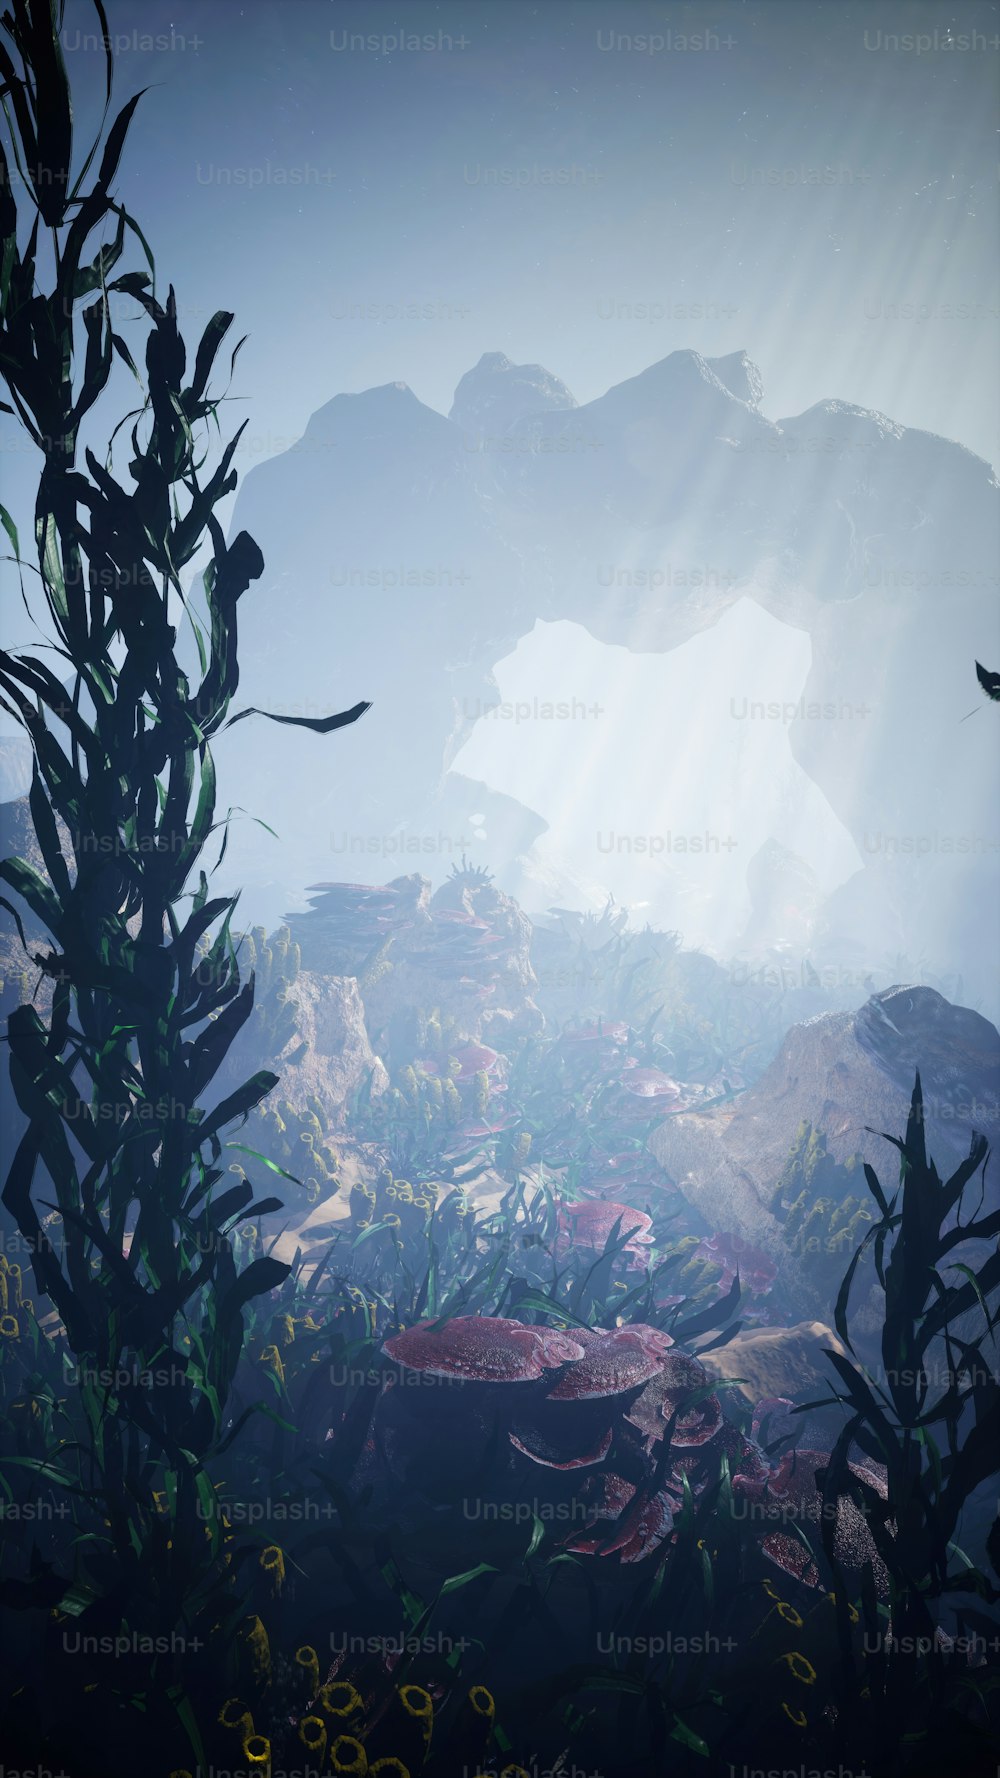 an underwater scene with plants and rocks in the foreground